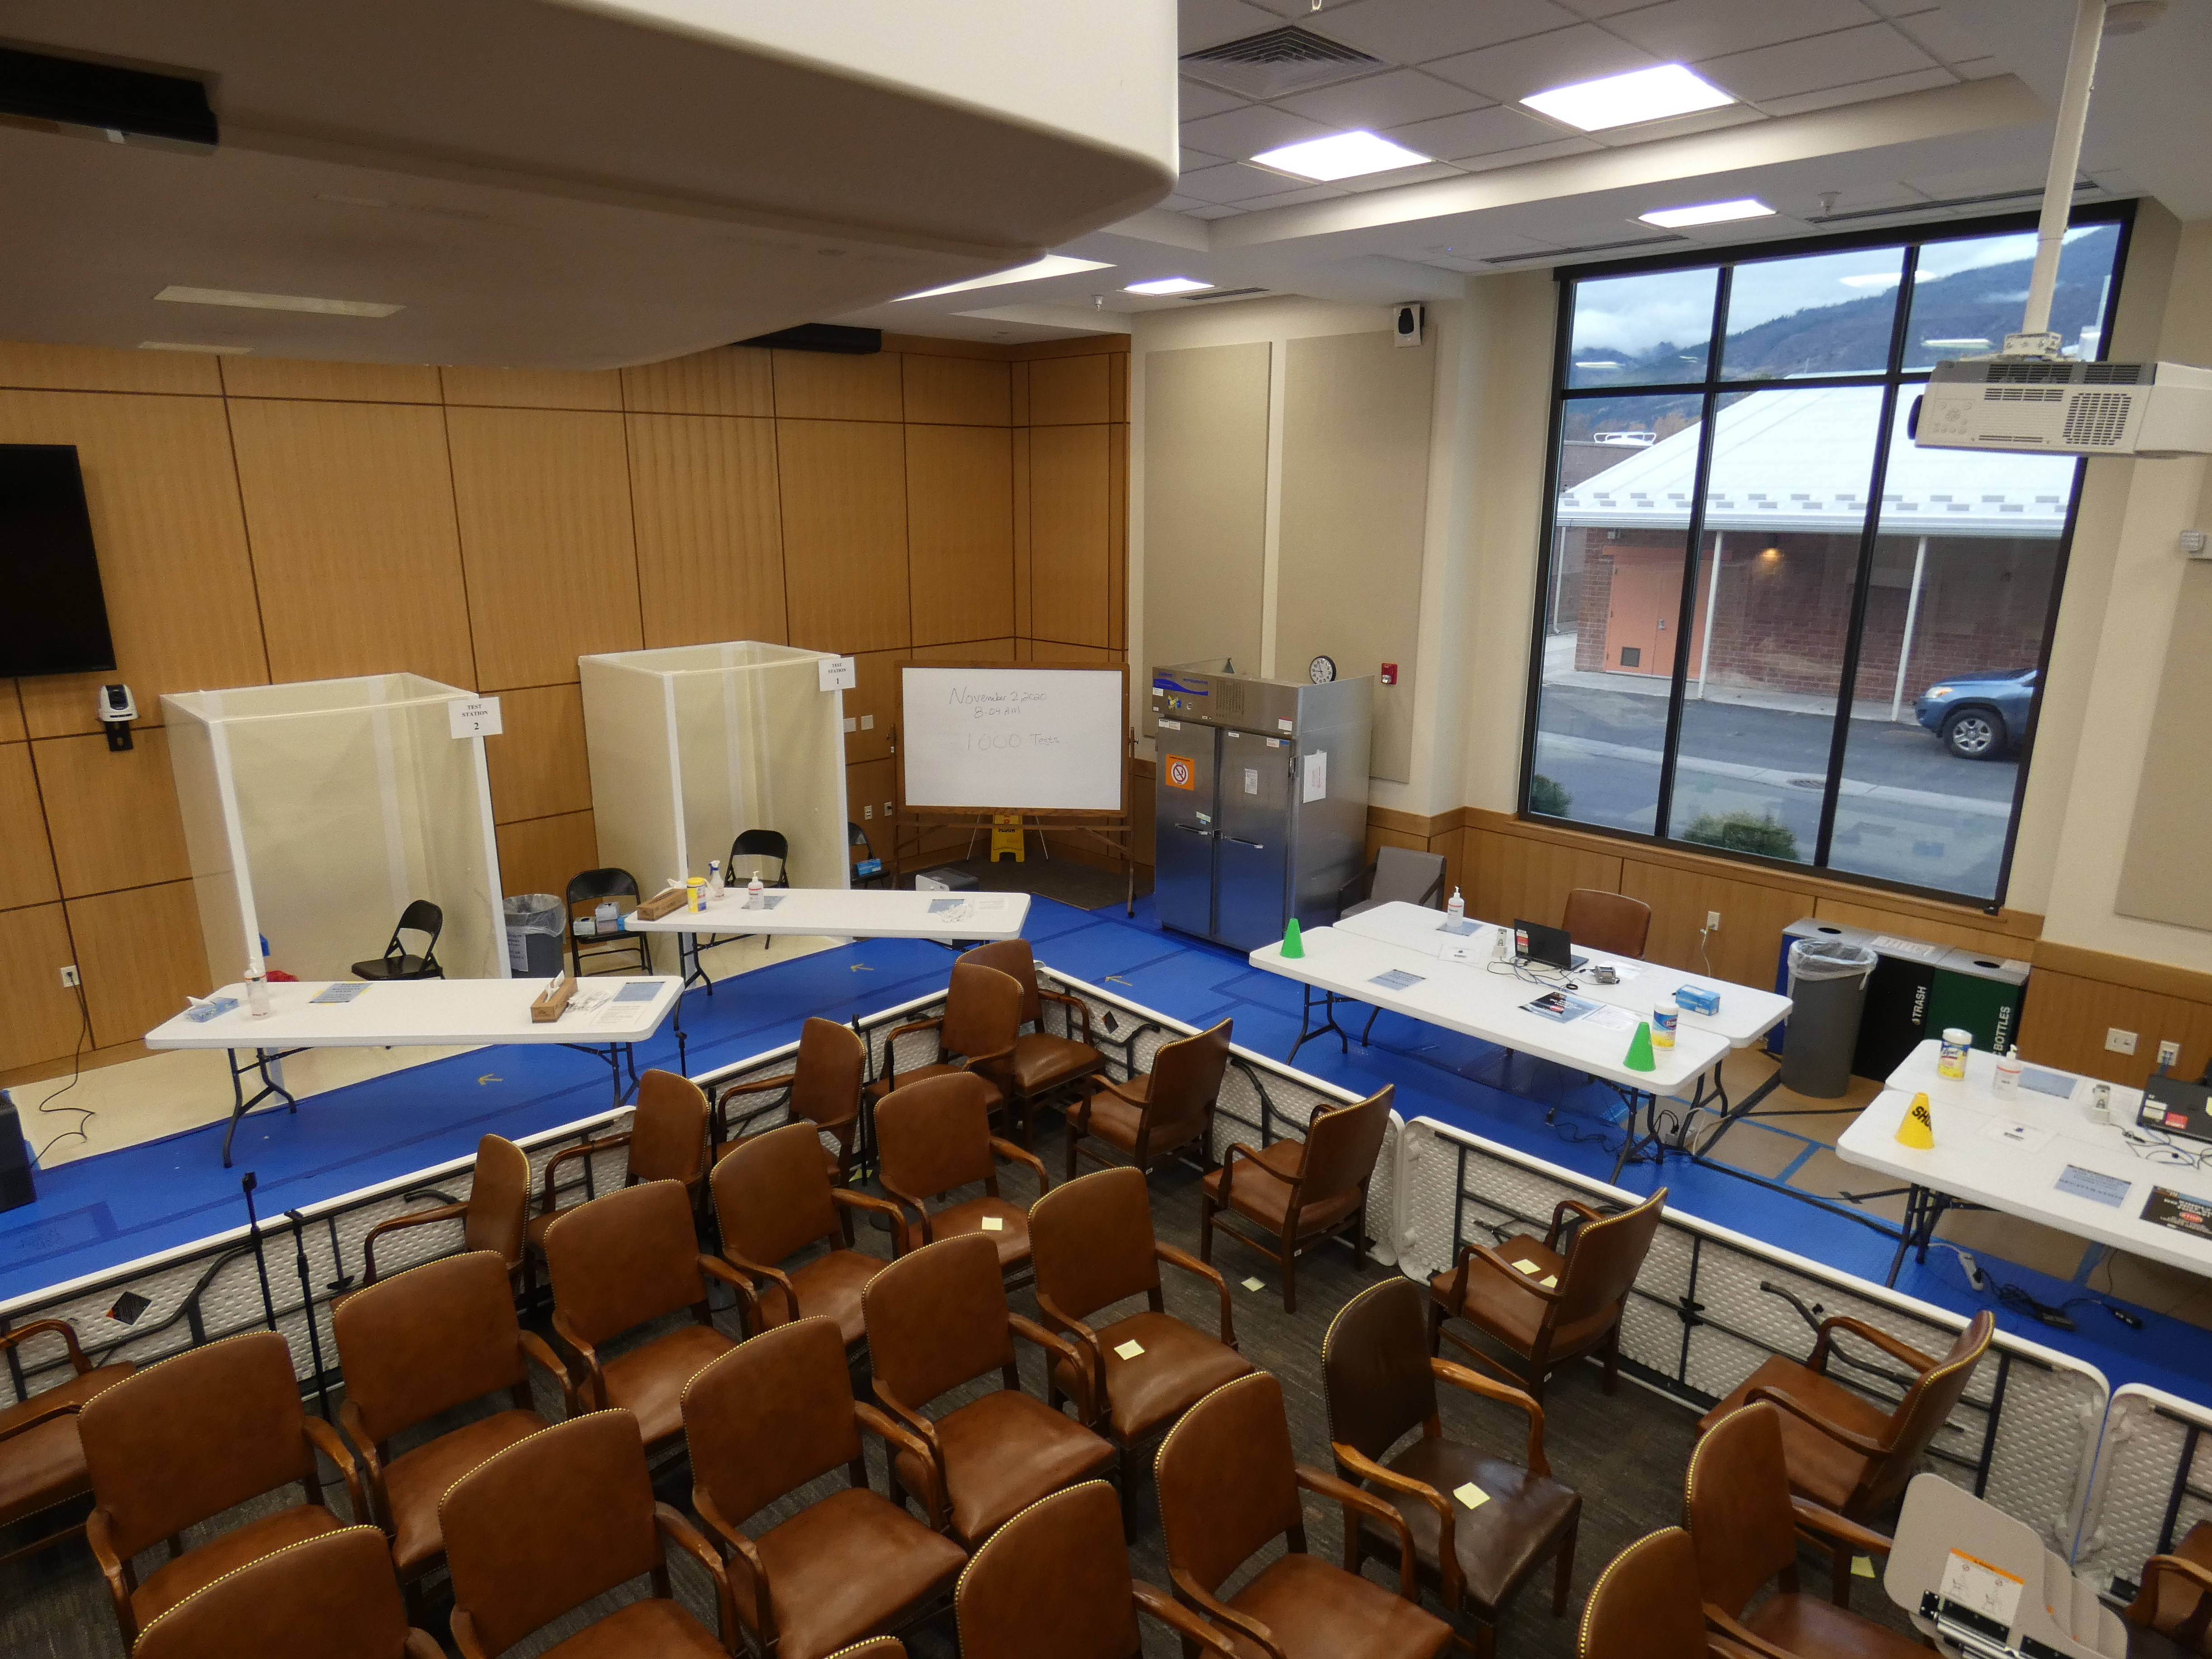 The RML COVID-19 testing and vaccination center, January 2020. A conference room with booths set up on the side and tables with clinical equipment, chairs piled in the middle.